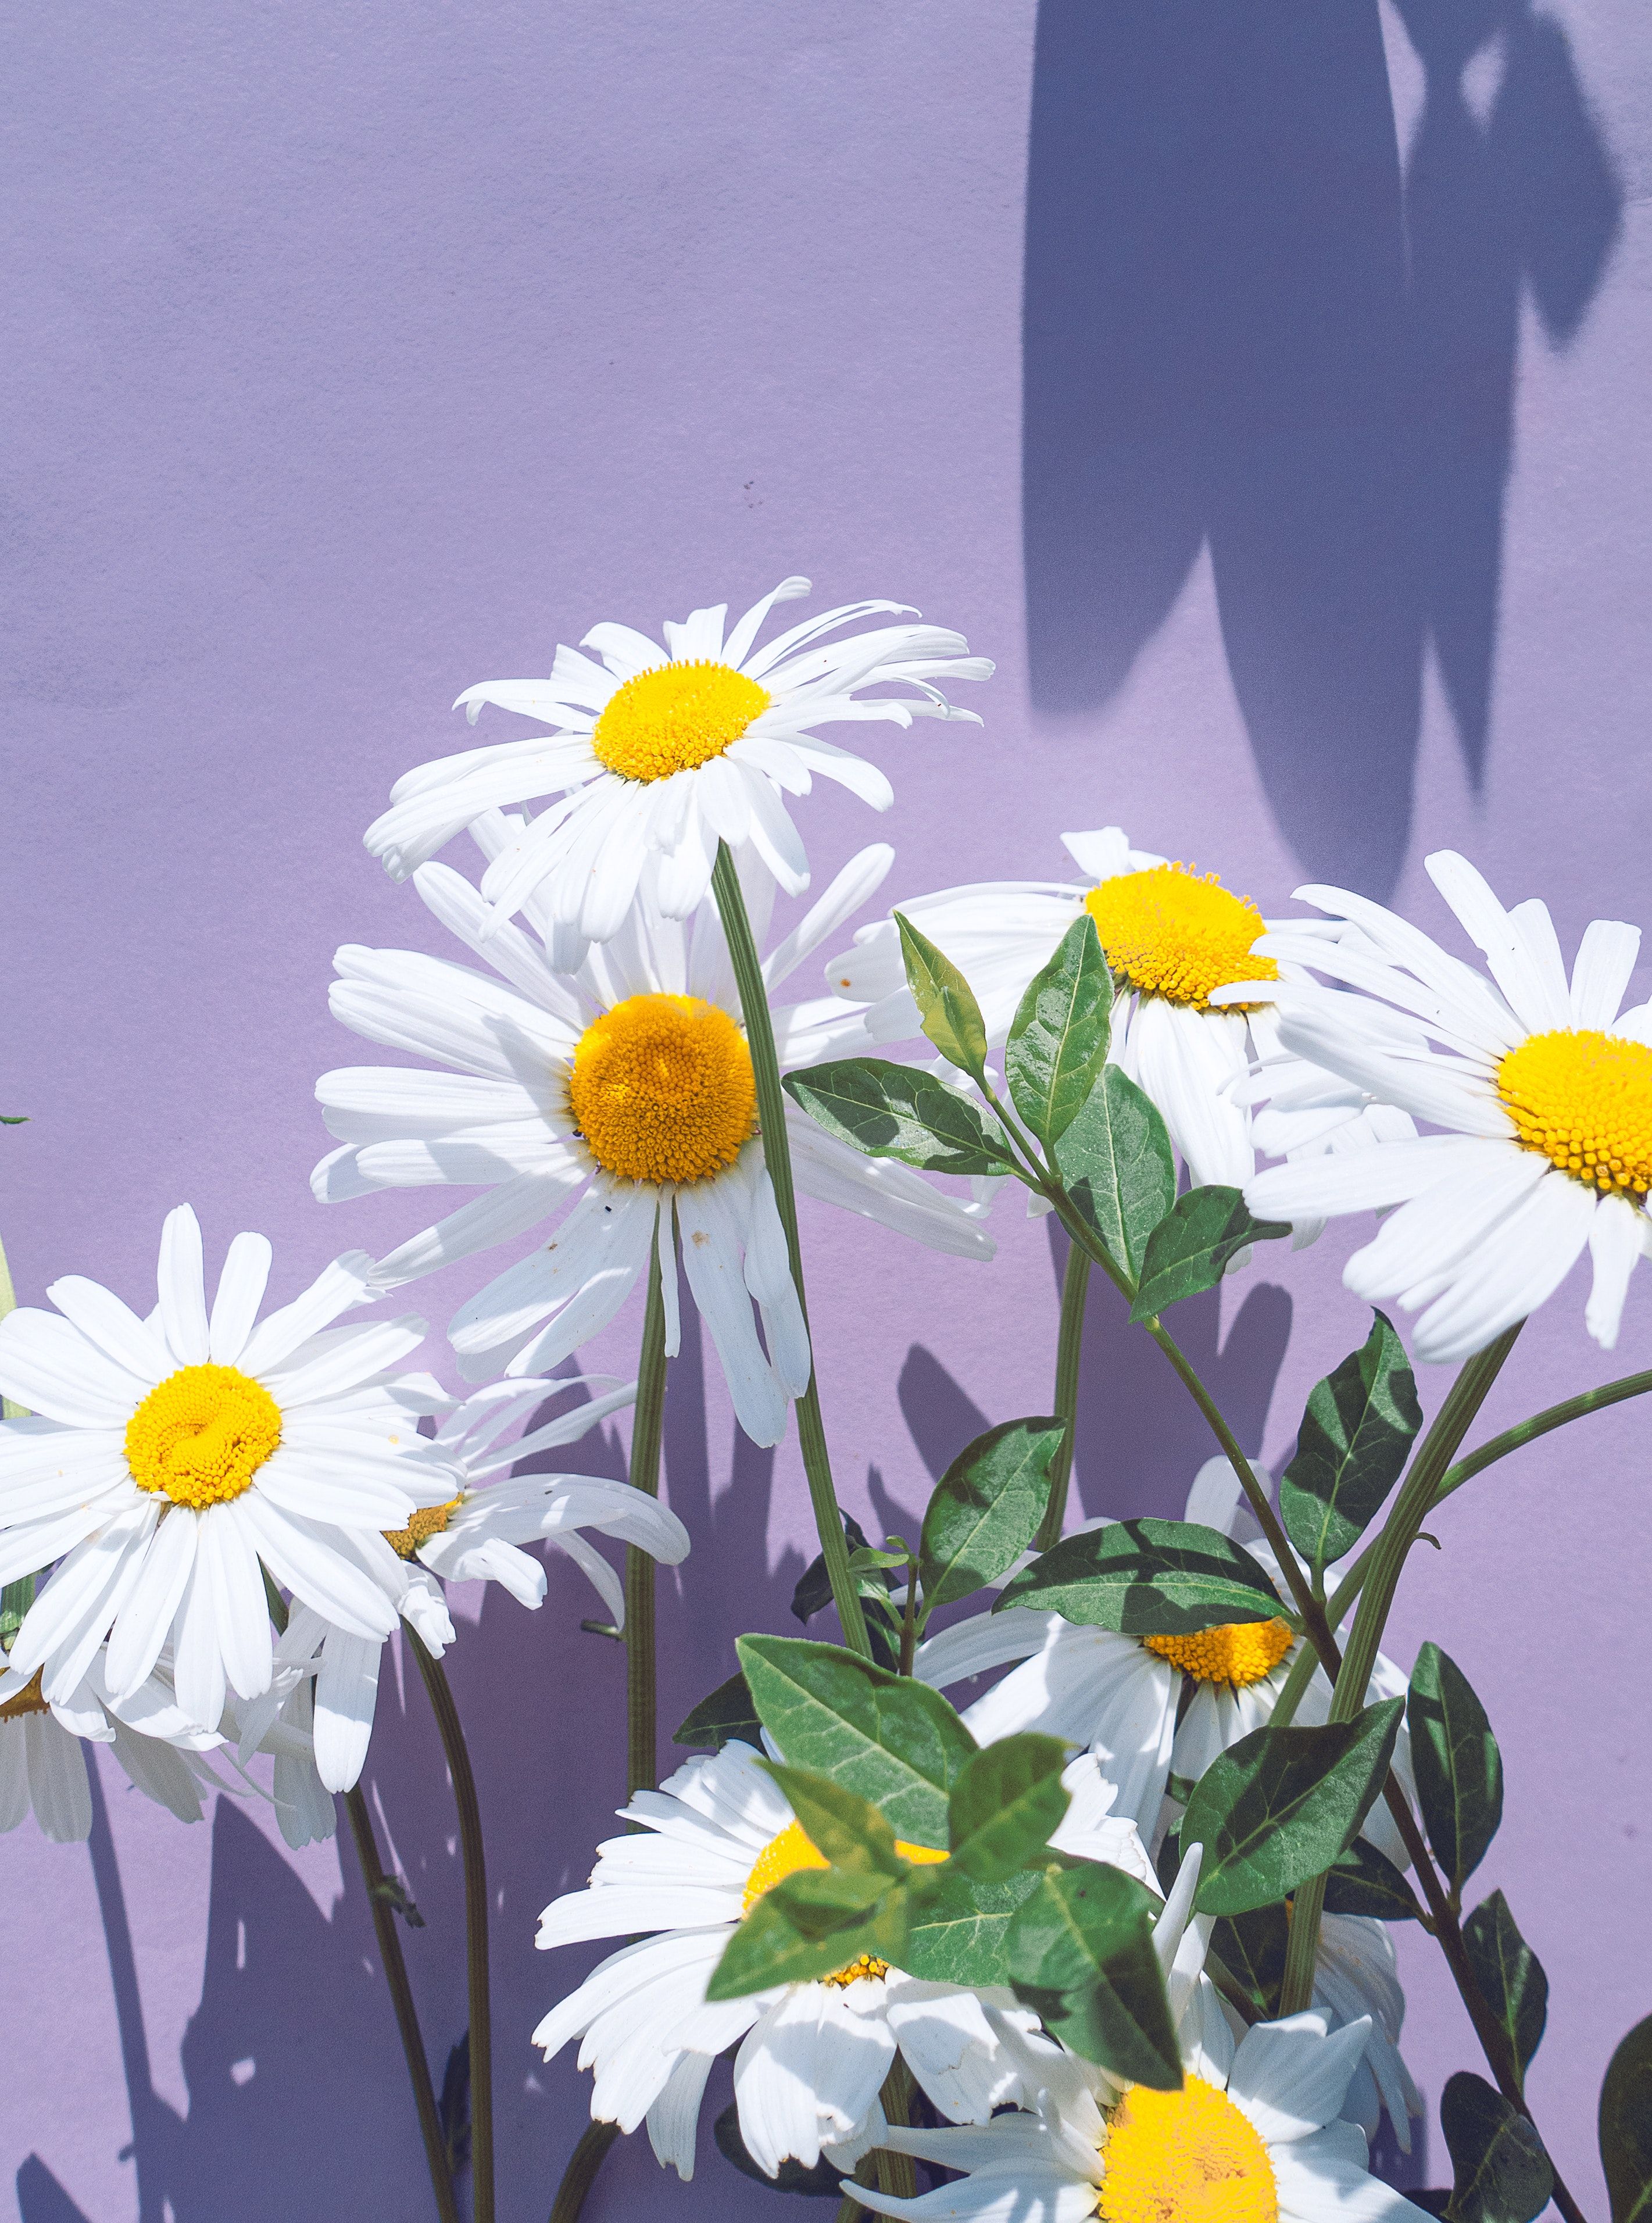 A bunch of daisies in front on purple wall - Daisy